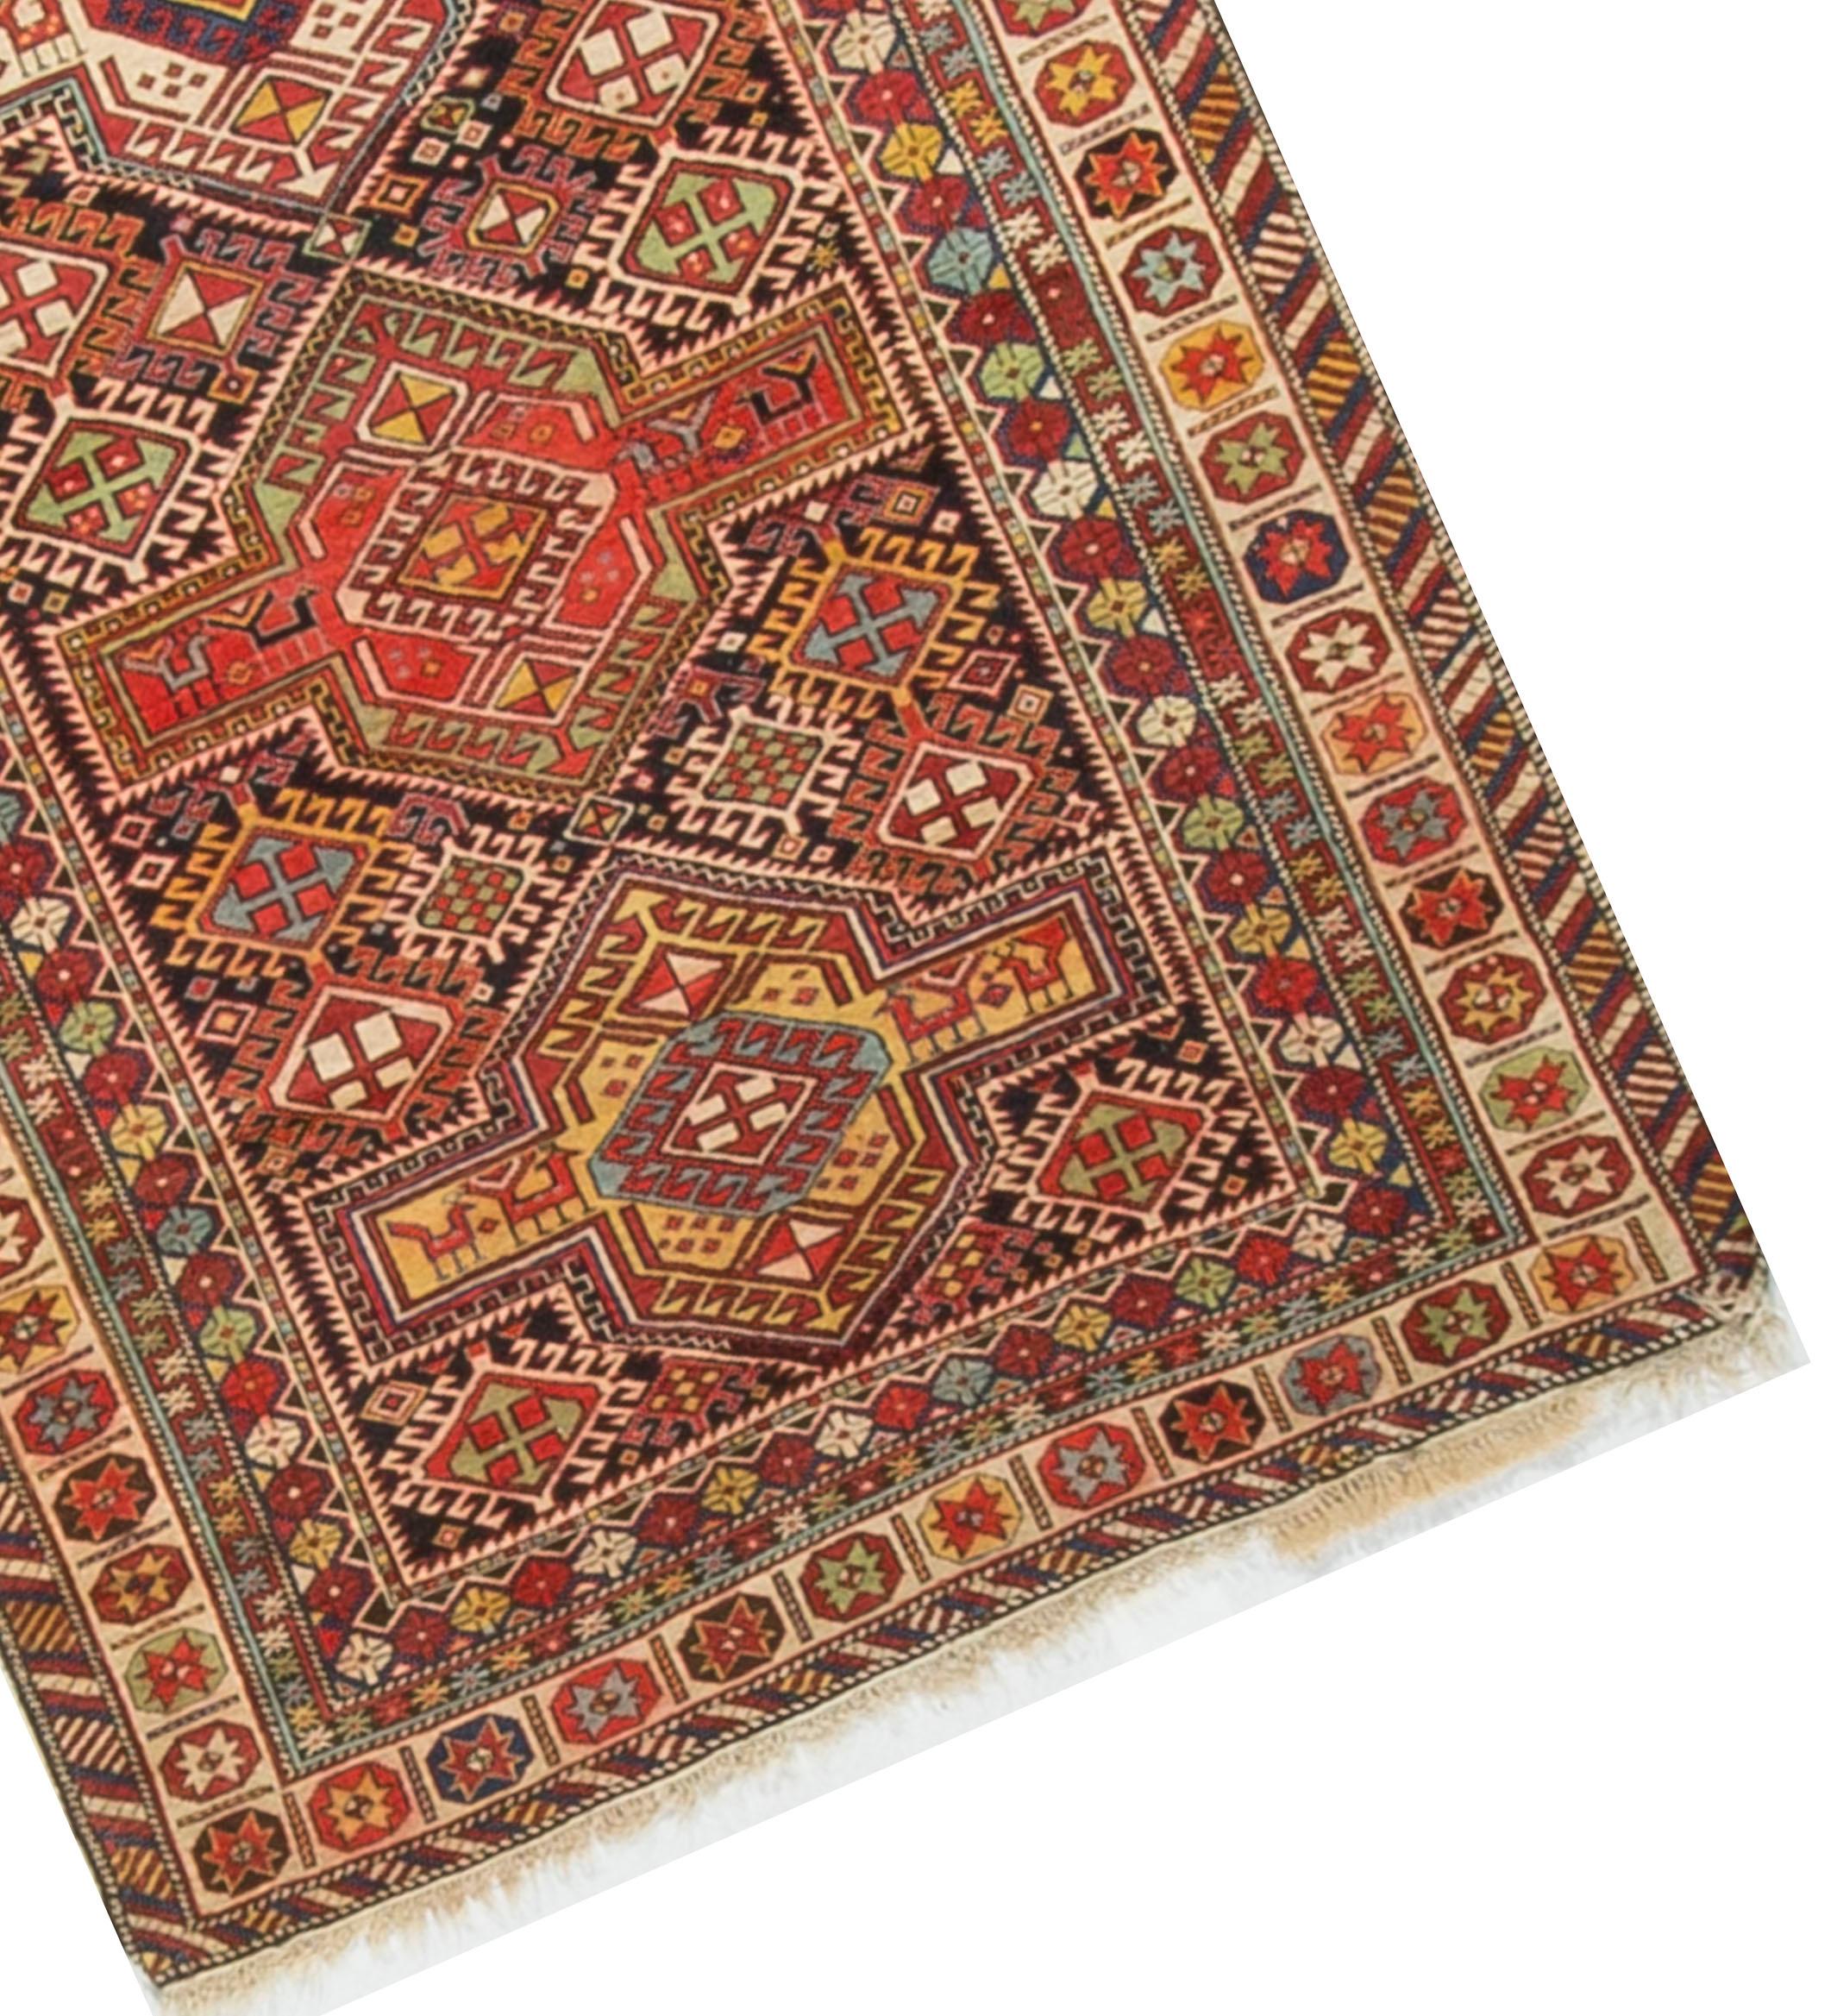 A lovely small Caucasian Shirvan handwoven rug, circa 1880. The central field filled with a myriad of designs, hidden away is also depictions of animals that as a special interest to this piece. The main border is filled with delightful floral